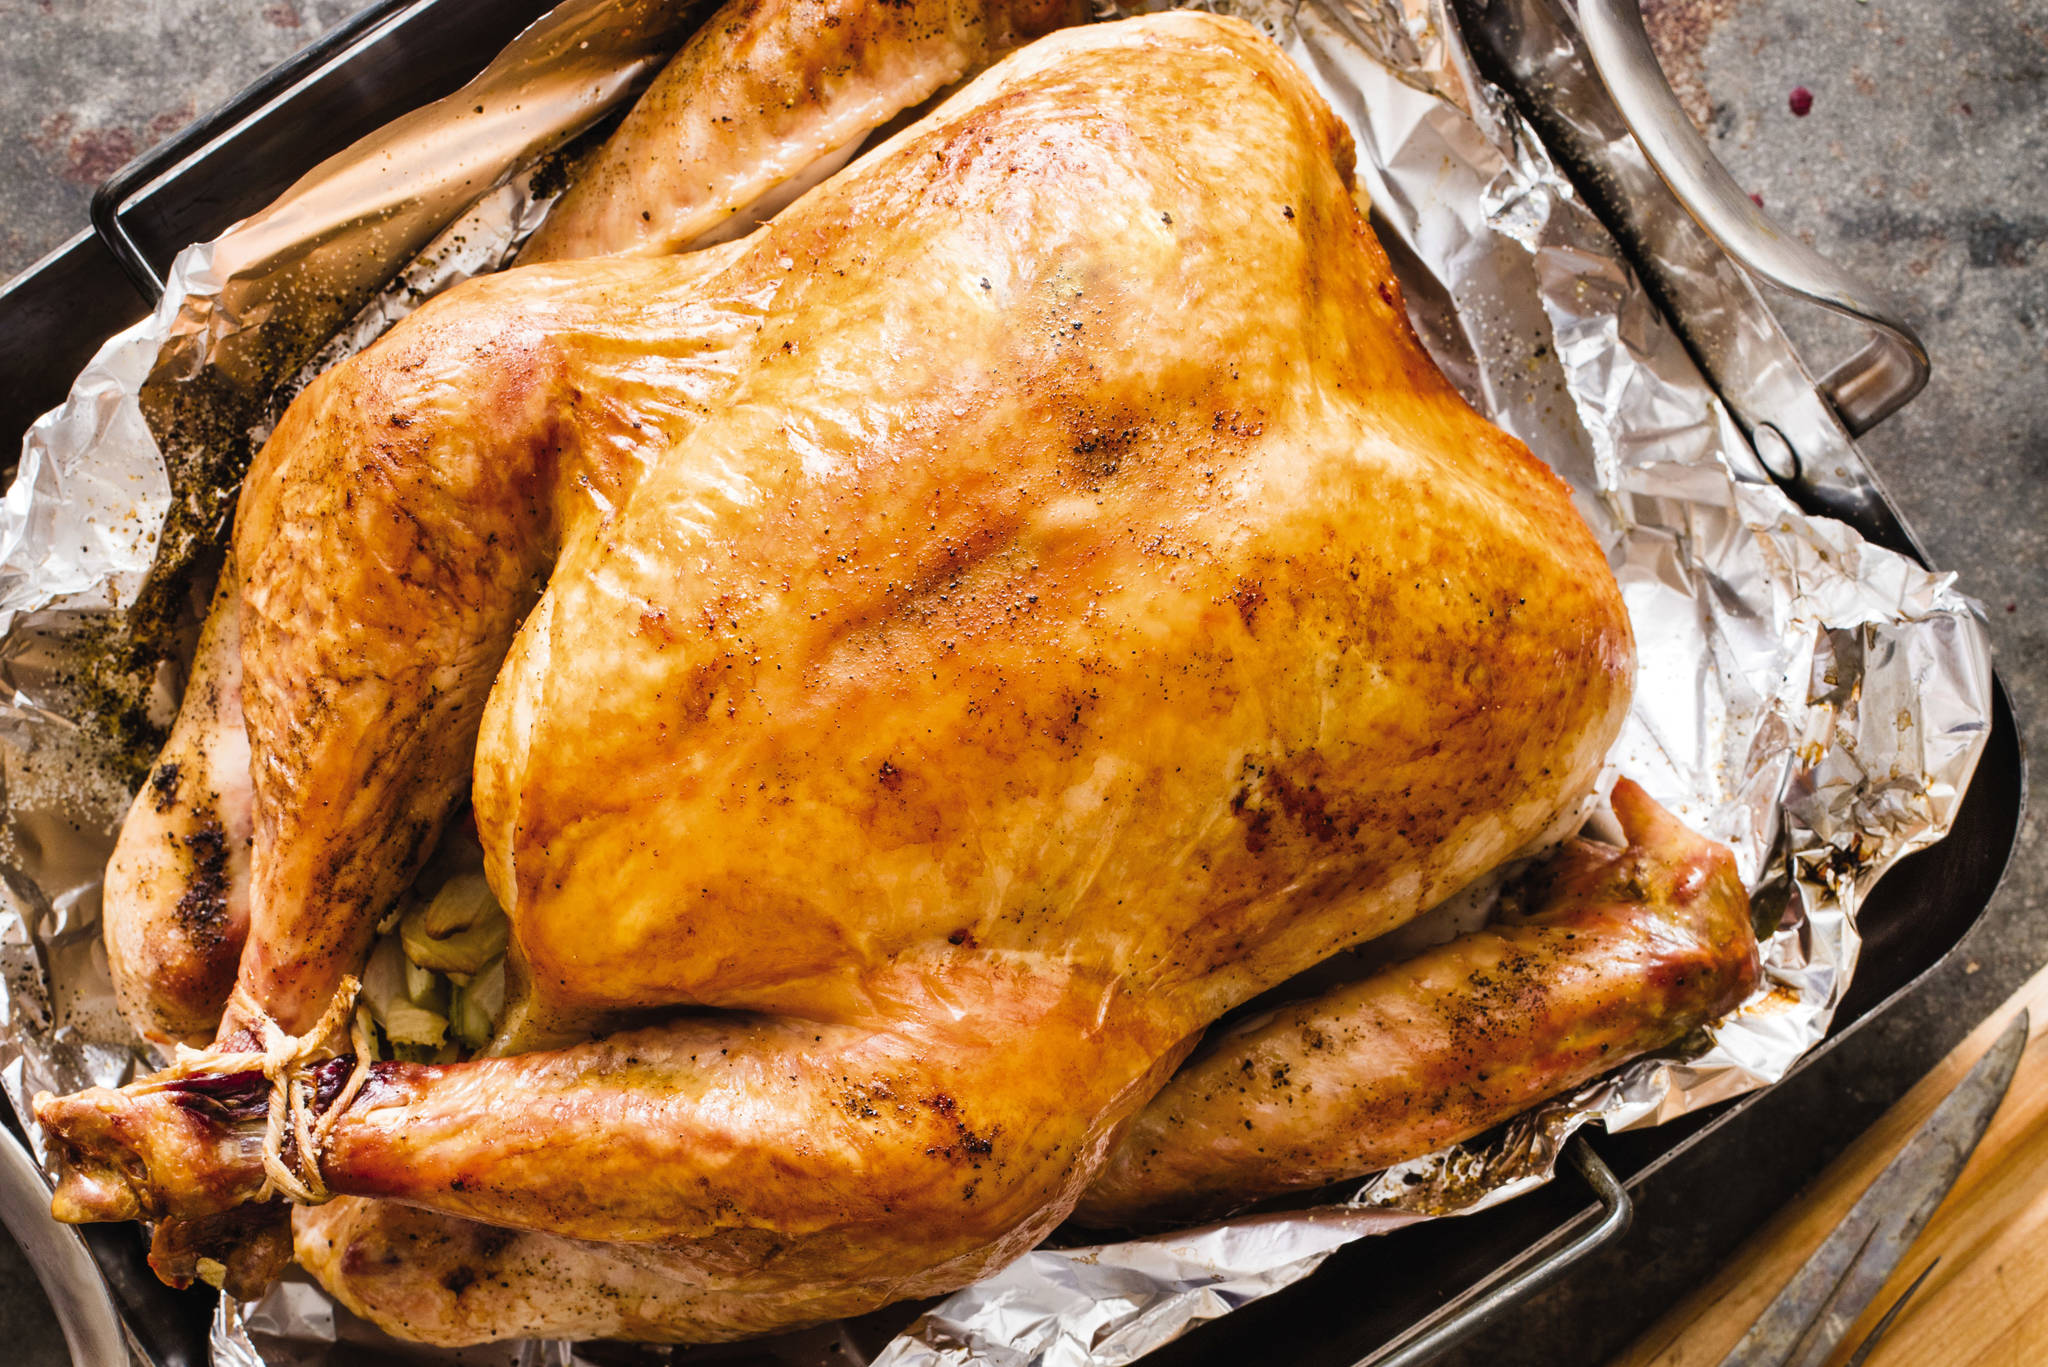 This undated photo provided by America’s Test Kitchen in October 2018 shows a roast turkey in Brookline, Mass. This recipe appears in the cookbook “ATB Holiday Entertaining.” (Daniel J. van Ackere/America’s Test Kitchen via AP)